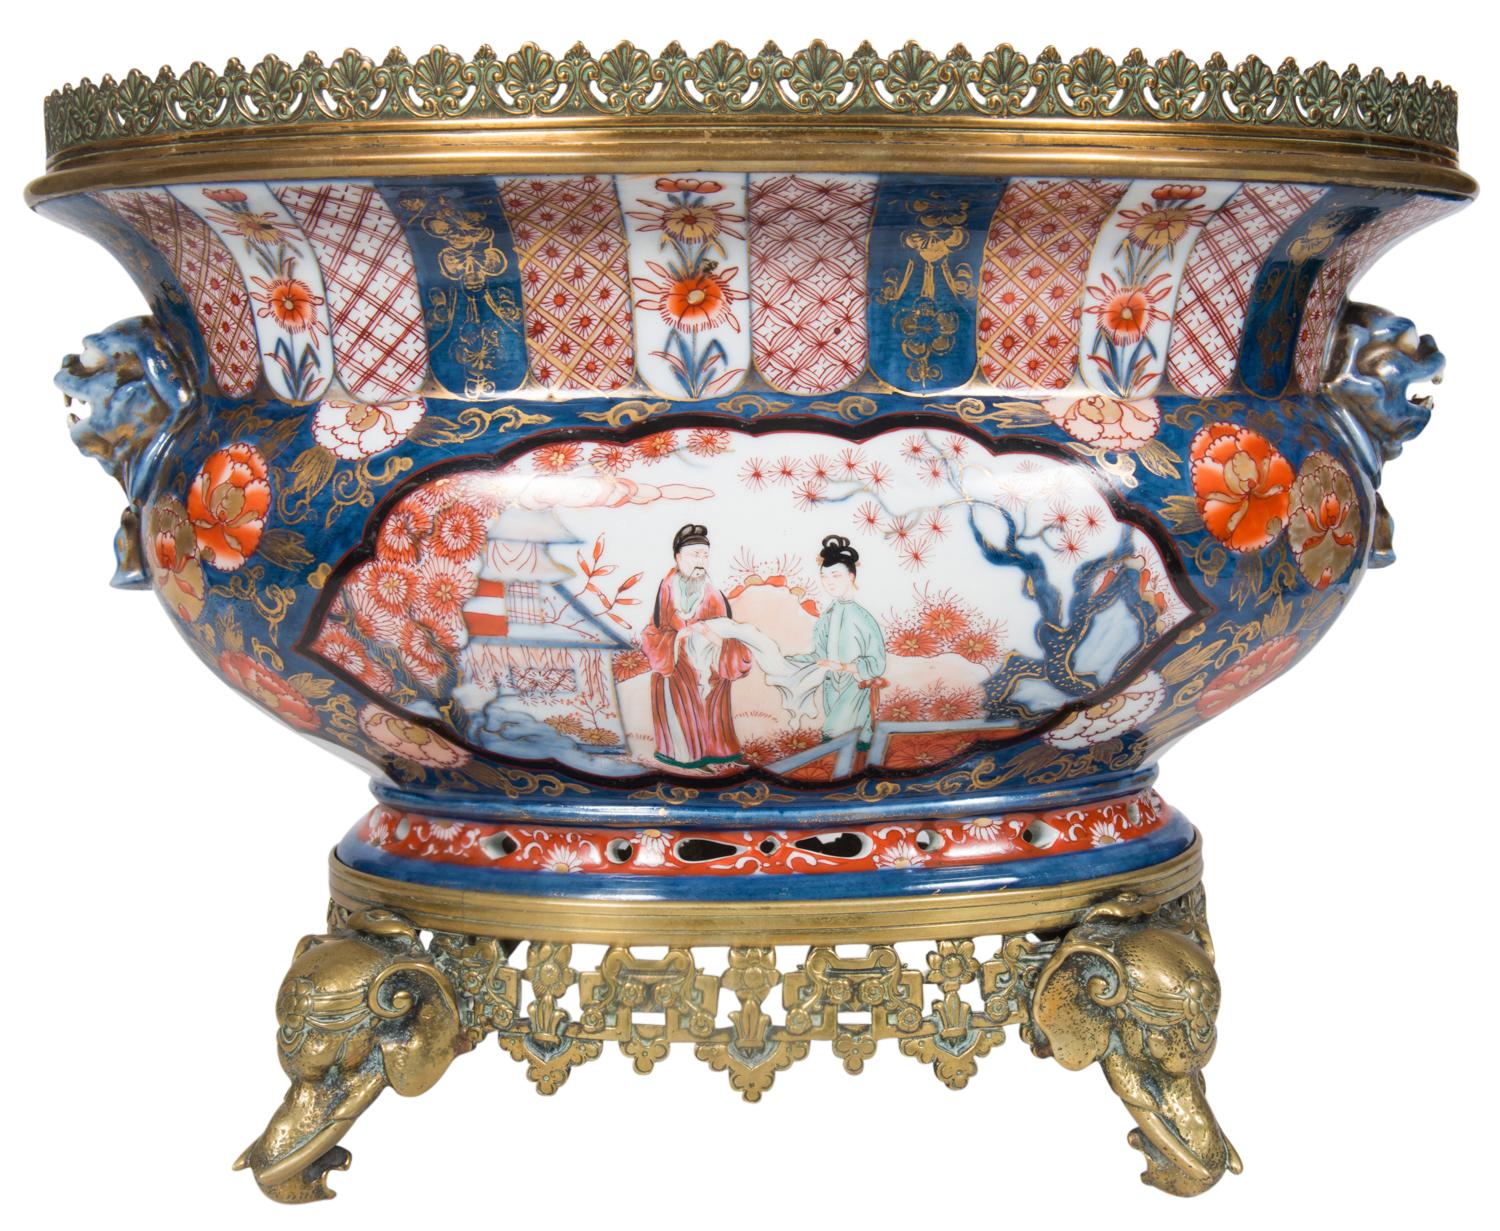 A good quality pair of Japanese style Samson 19th century Imari jardinières each having gilded galleries to the top, classical painted motifs, panels depicting figure in a garden, mythical dog of faux handles on either side, mounted on ormolu bases